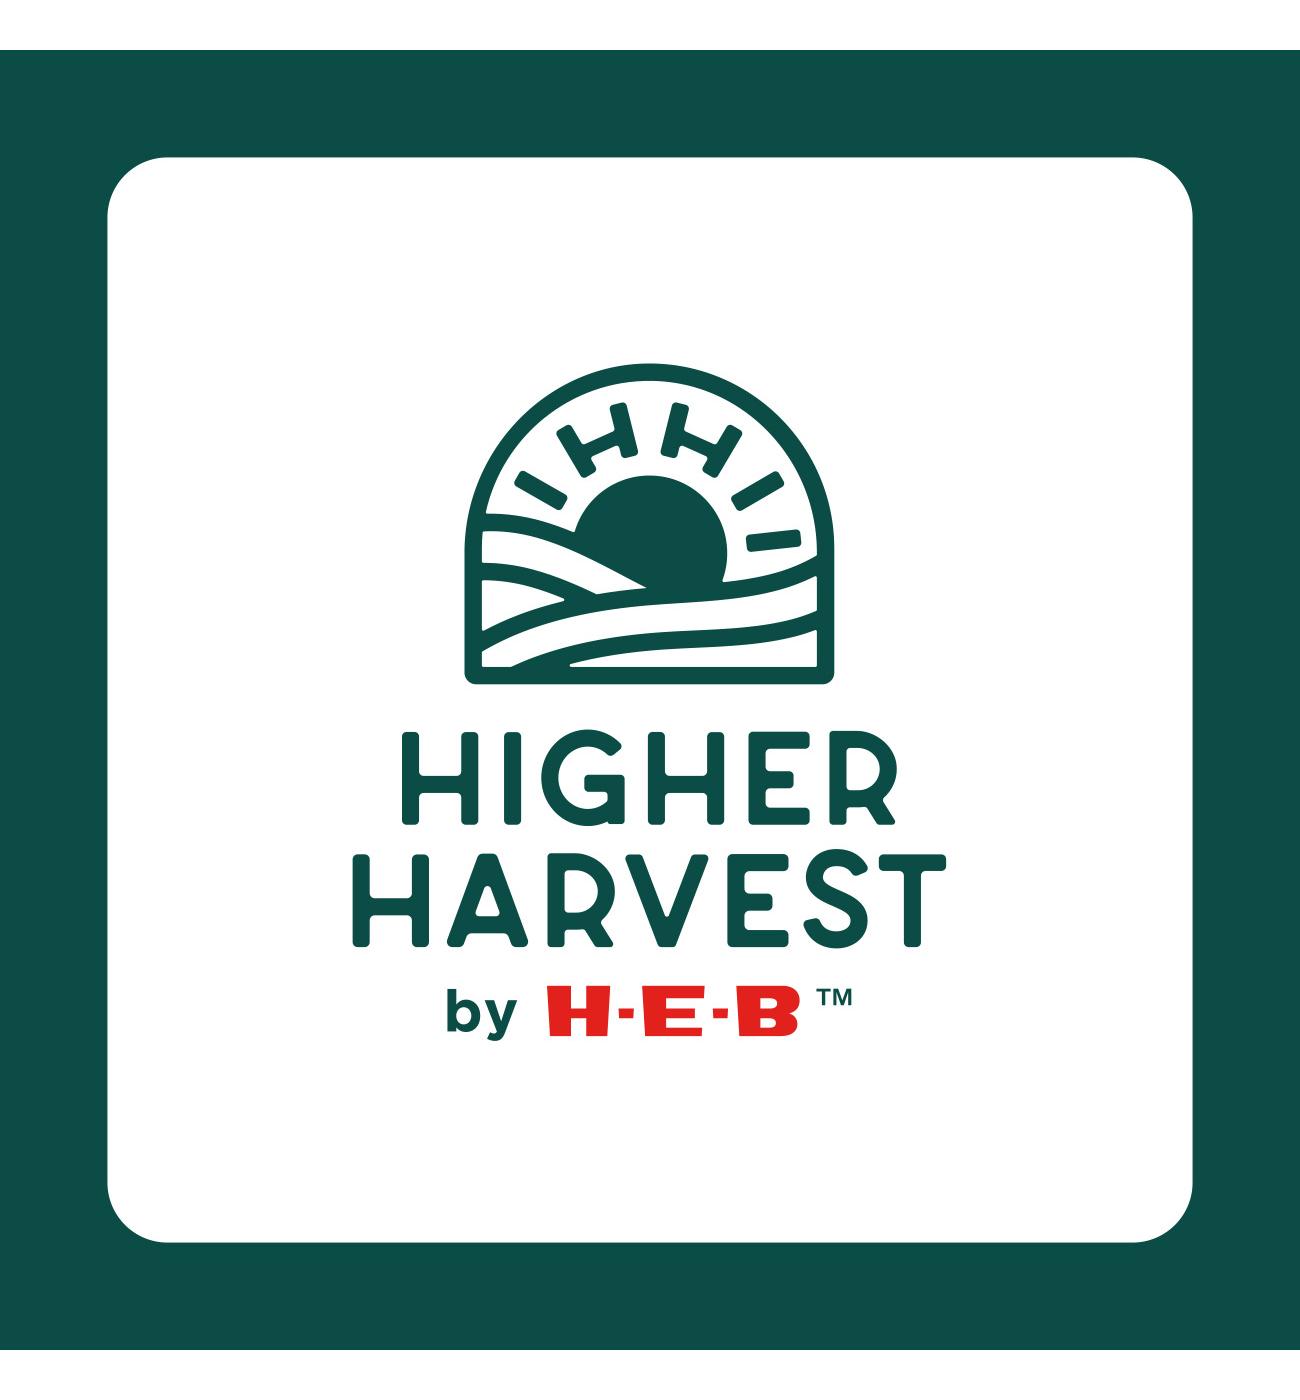 Higher Harvest by H-E-B Non-Dairy Frozen Dessert - Minty Choco Chip; image 2 of 2